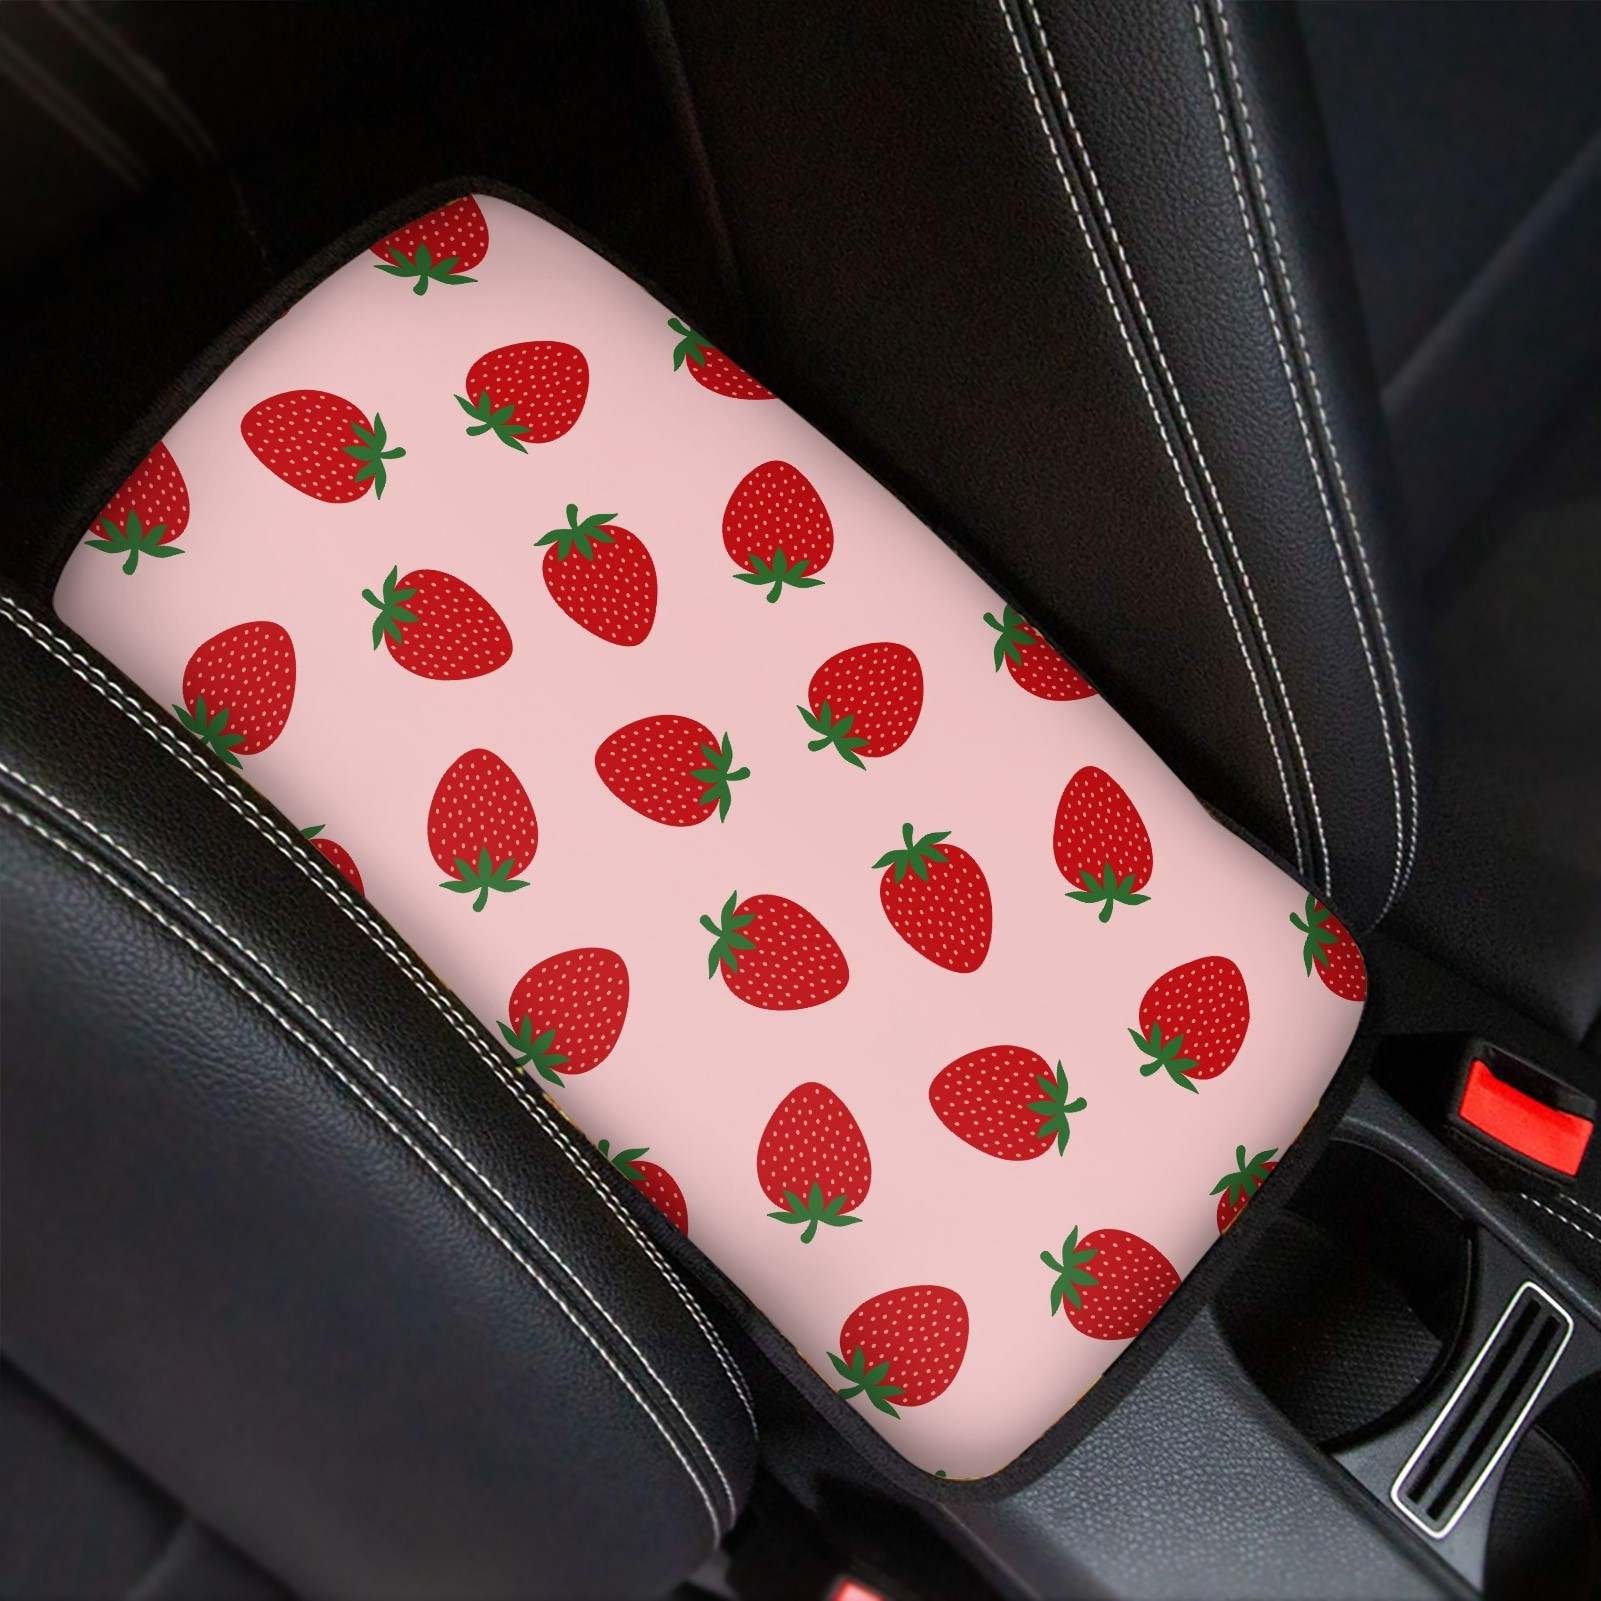 Cute girl car accessories - Best accessories for your car